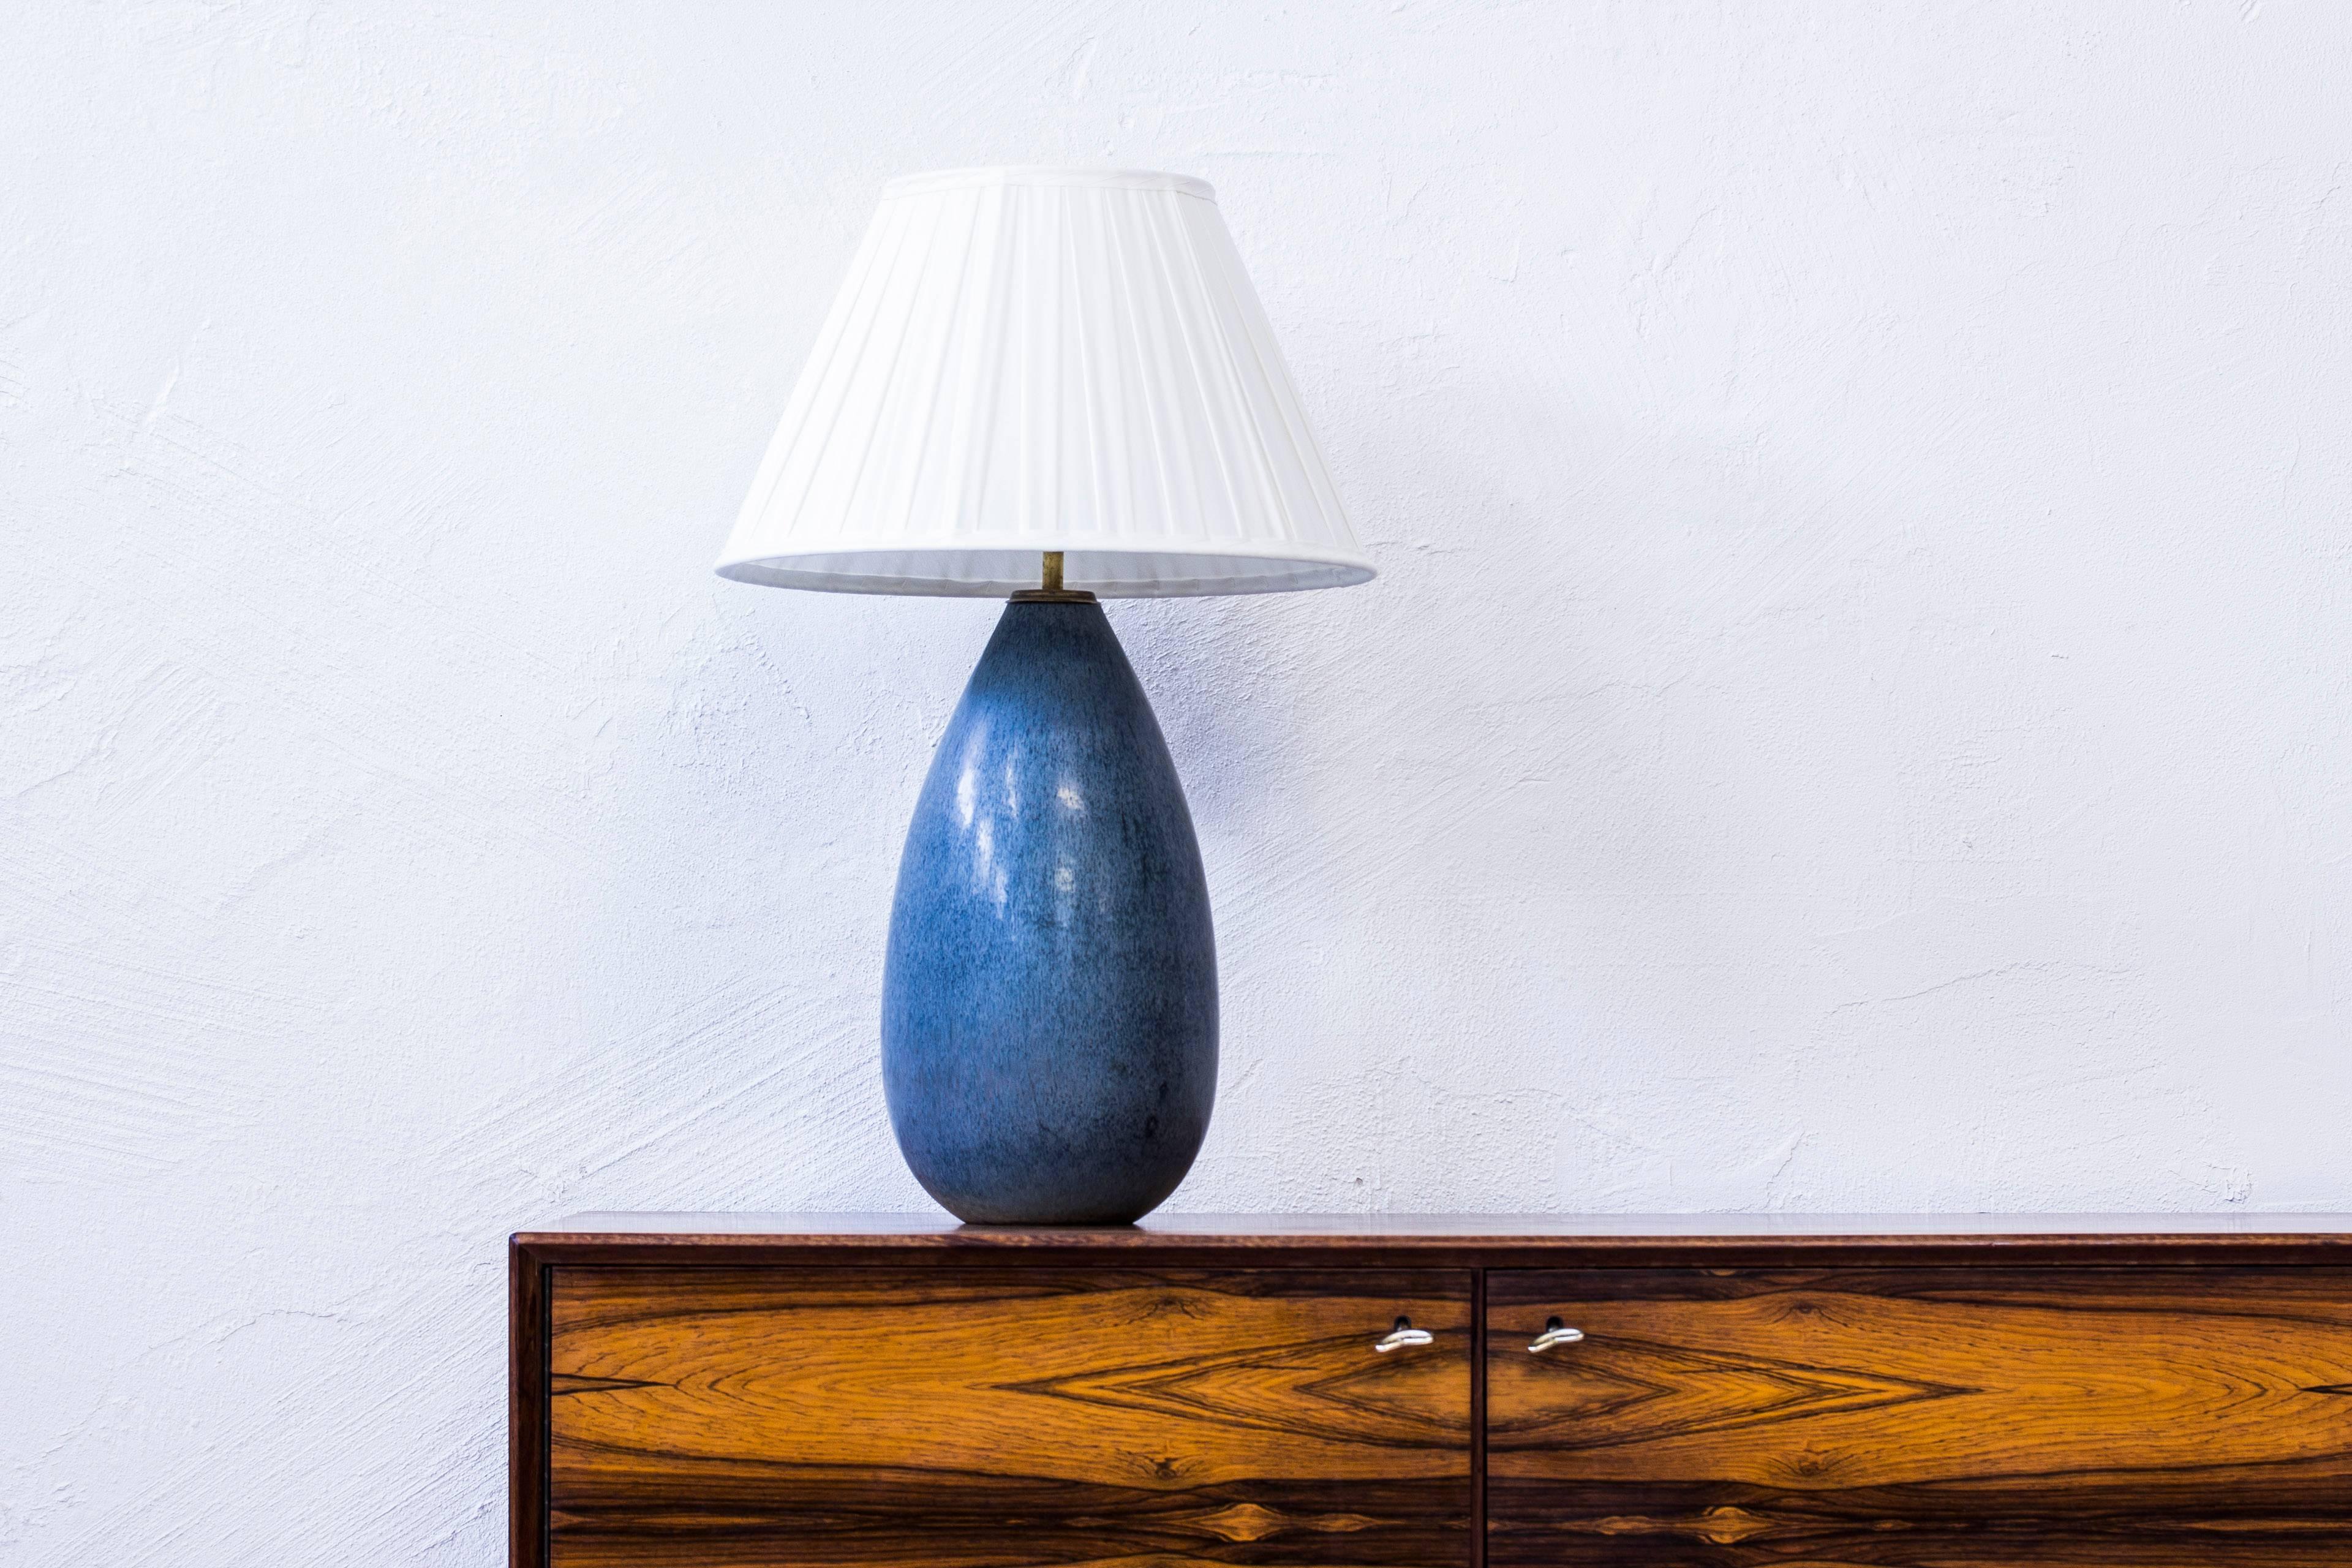 Table lamp designed by Carl Harry Stålhane. Produced by hand at Rörstrand during the 1950s. Blue, grey glaze with hints of purple. Brass fitting on the top. With new hand-sewn, pleated chintz lampshade. Excellent condition with light age related